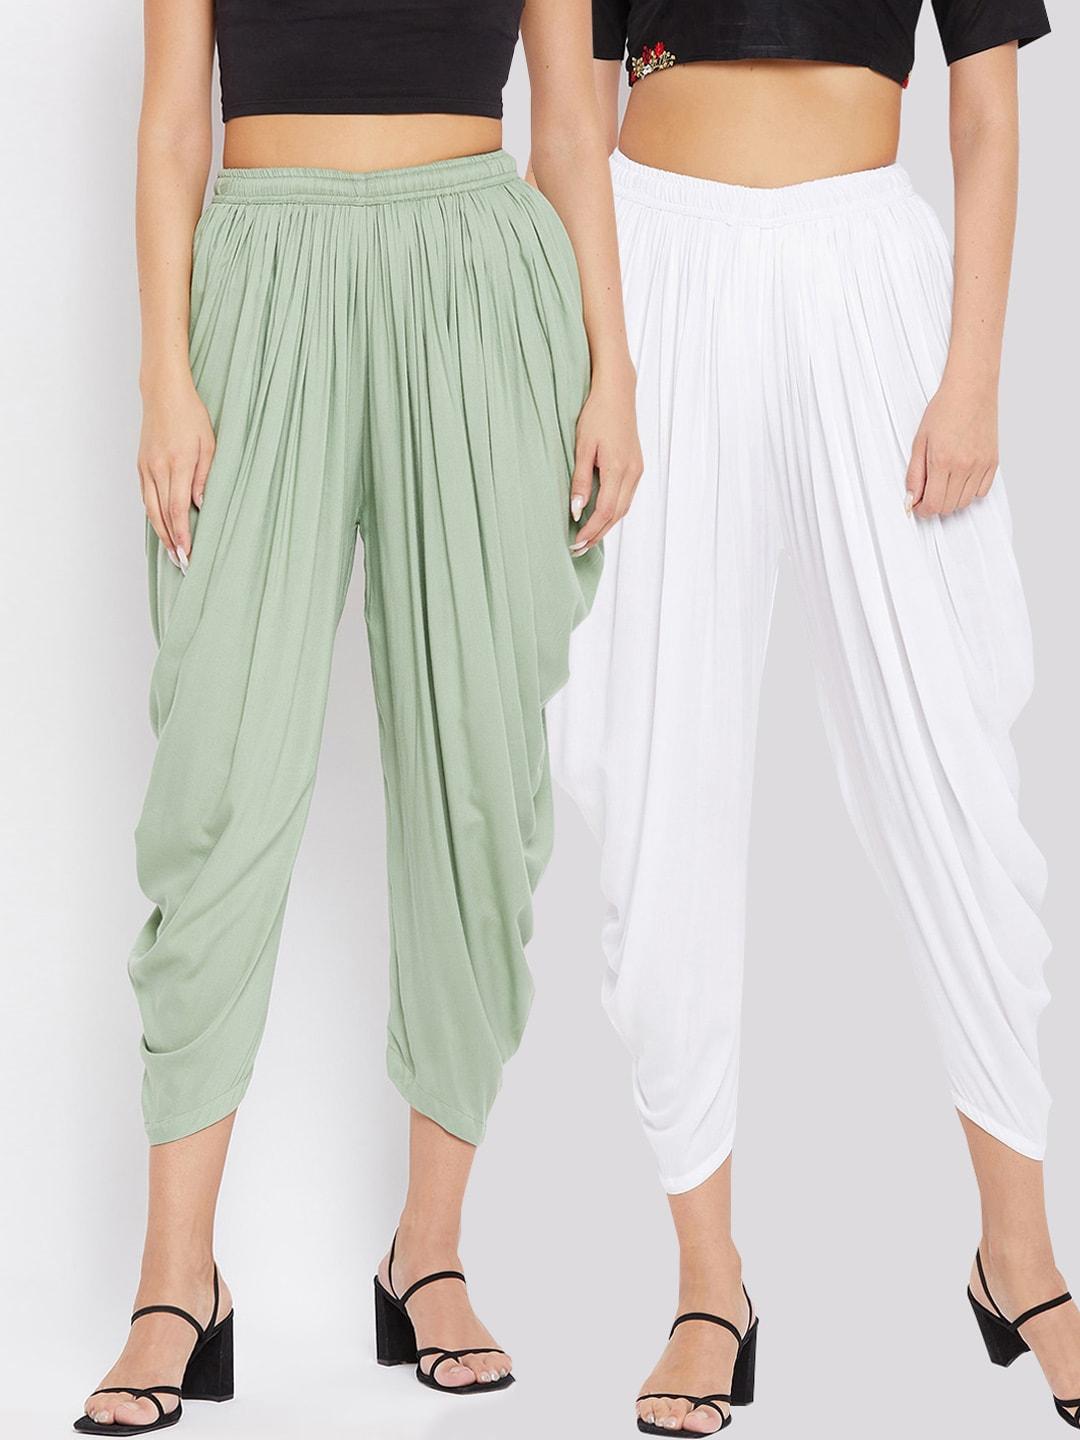 clora creation women pack of 2 white & mint green solid dhoti pants